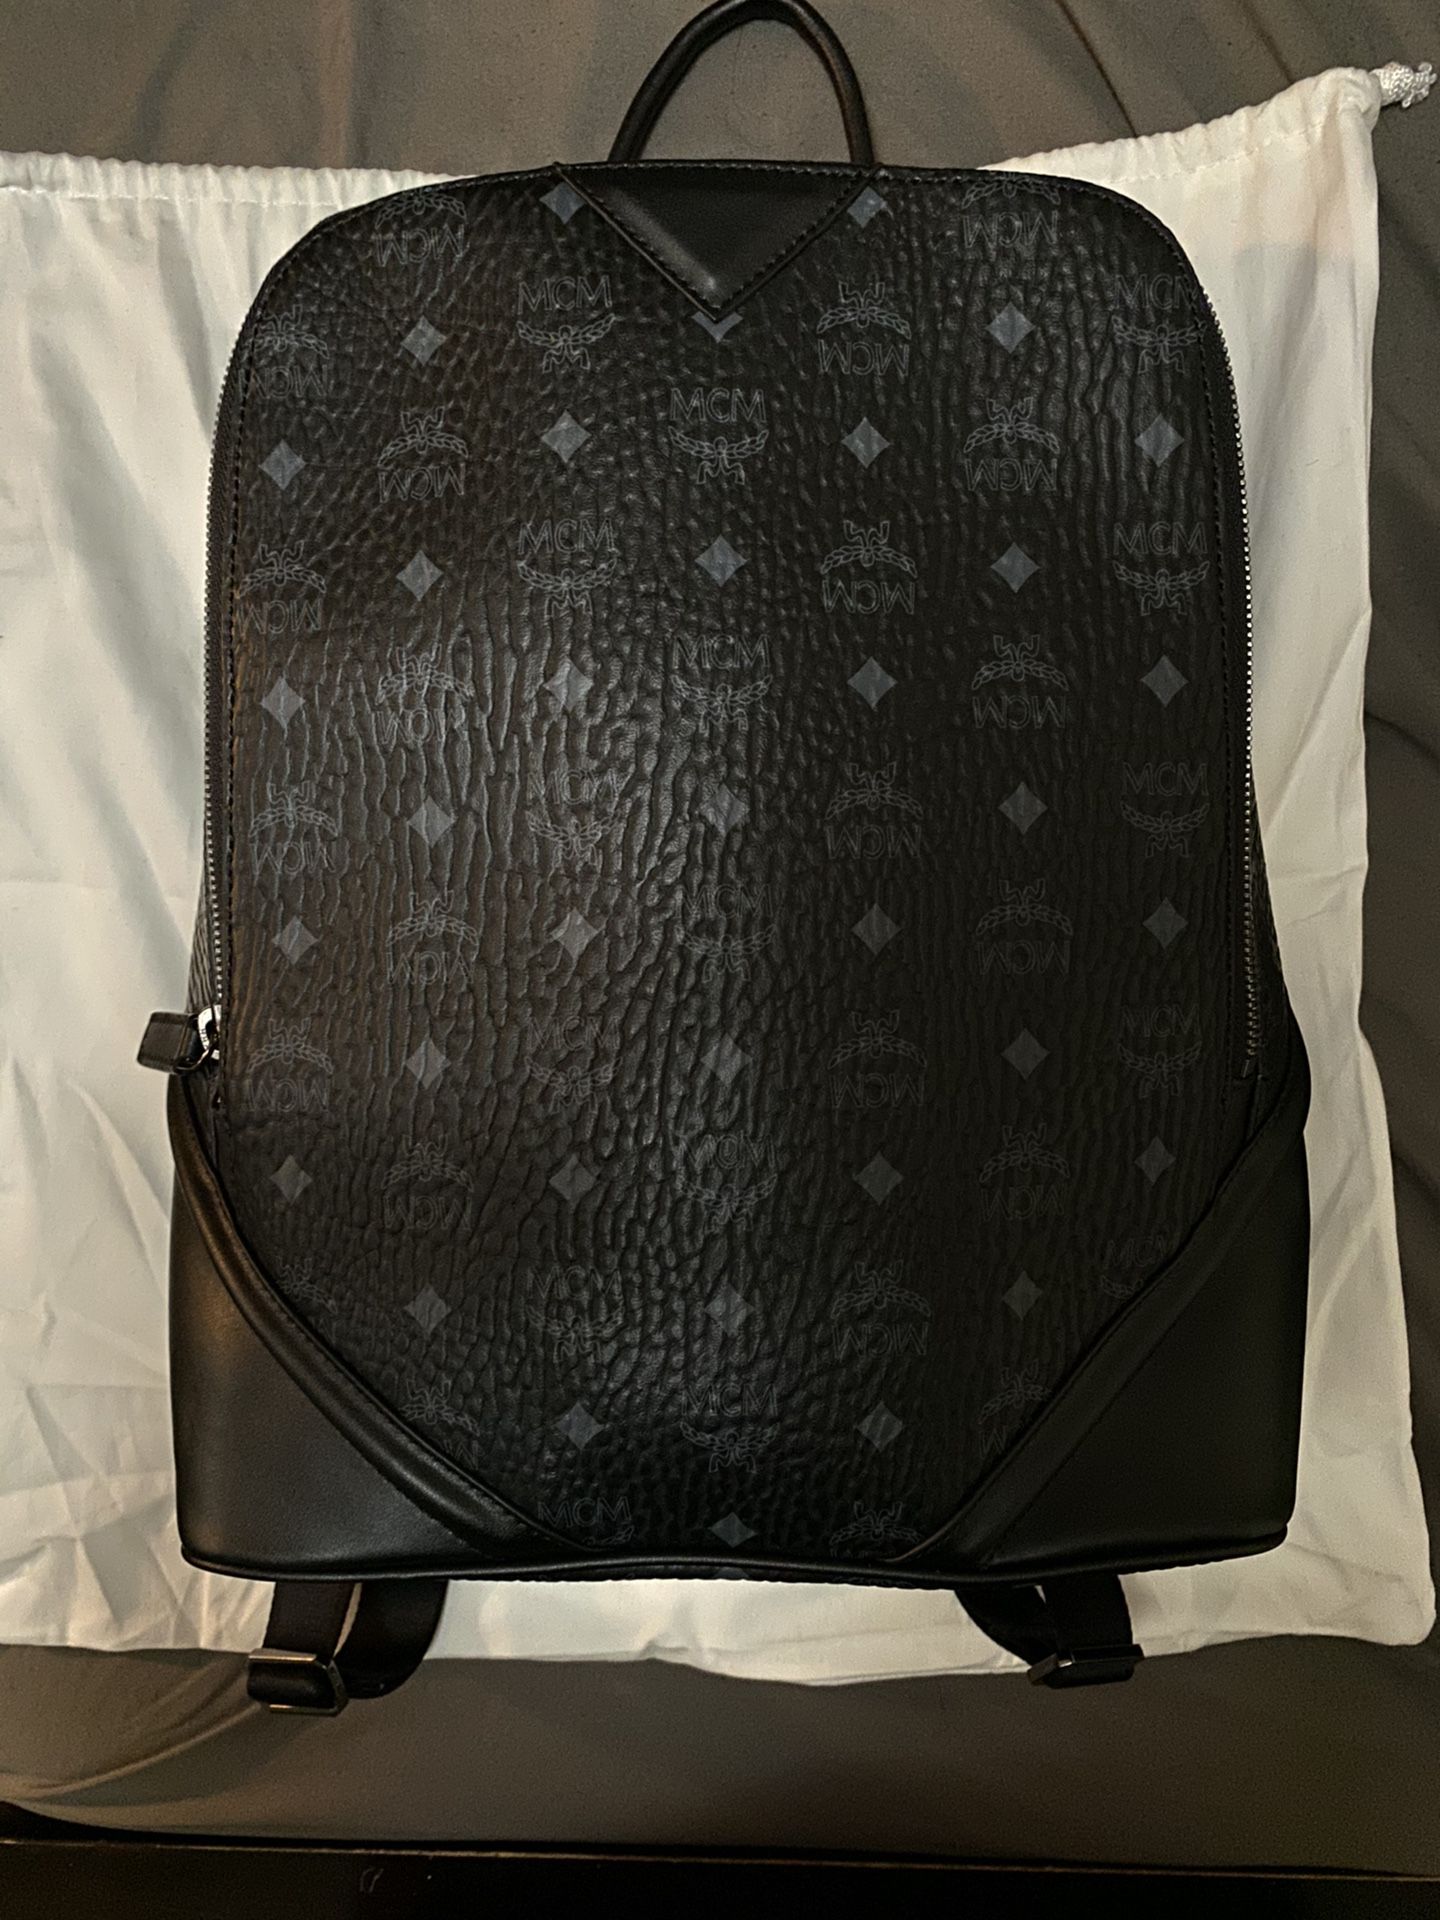 Black Mcm Backpack 100% Authentic